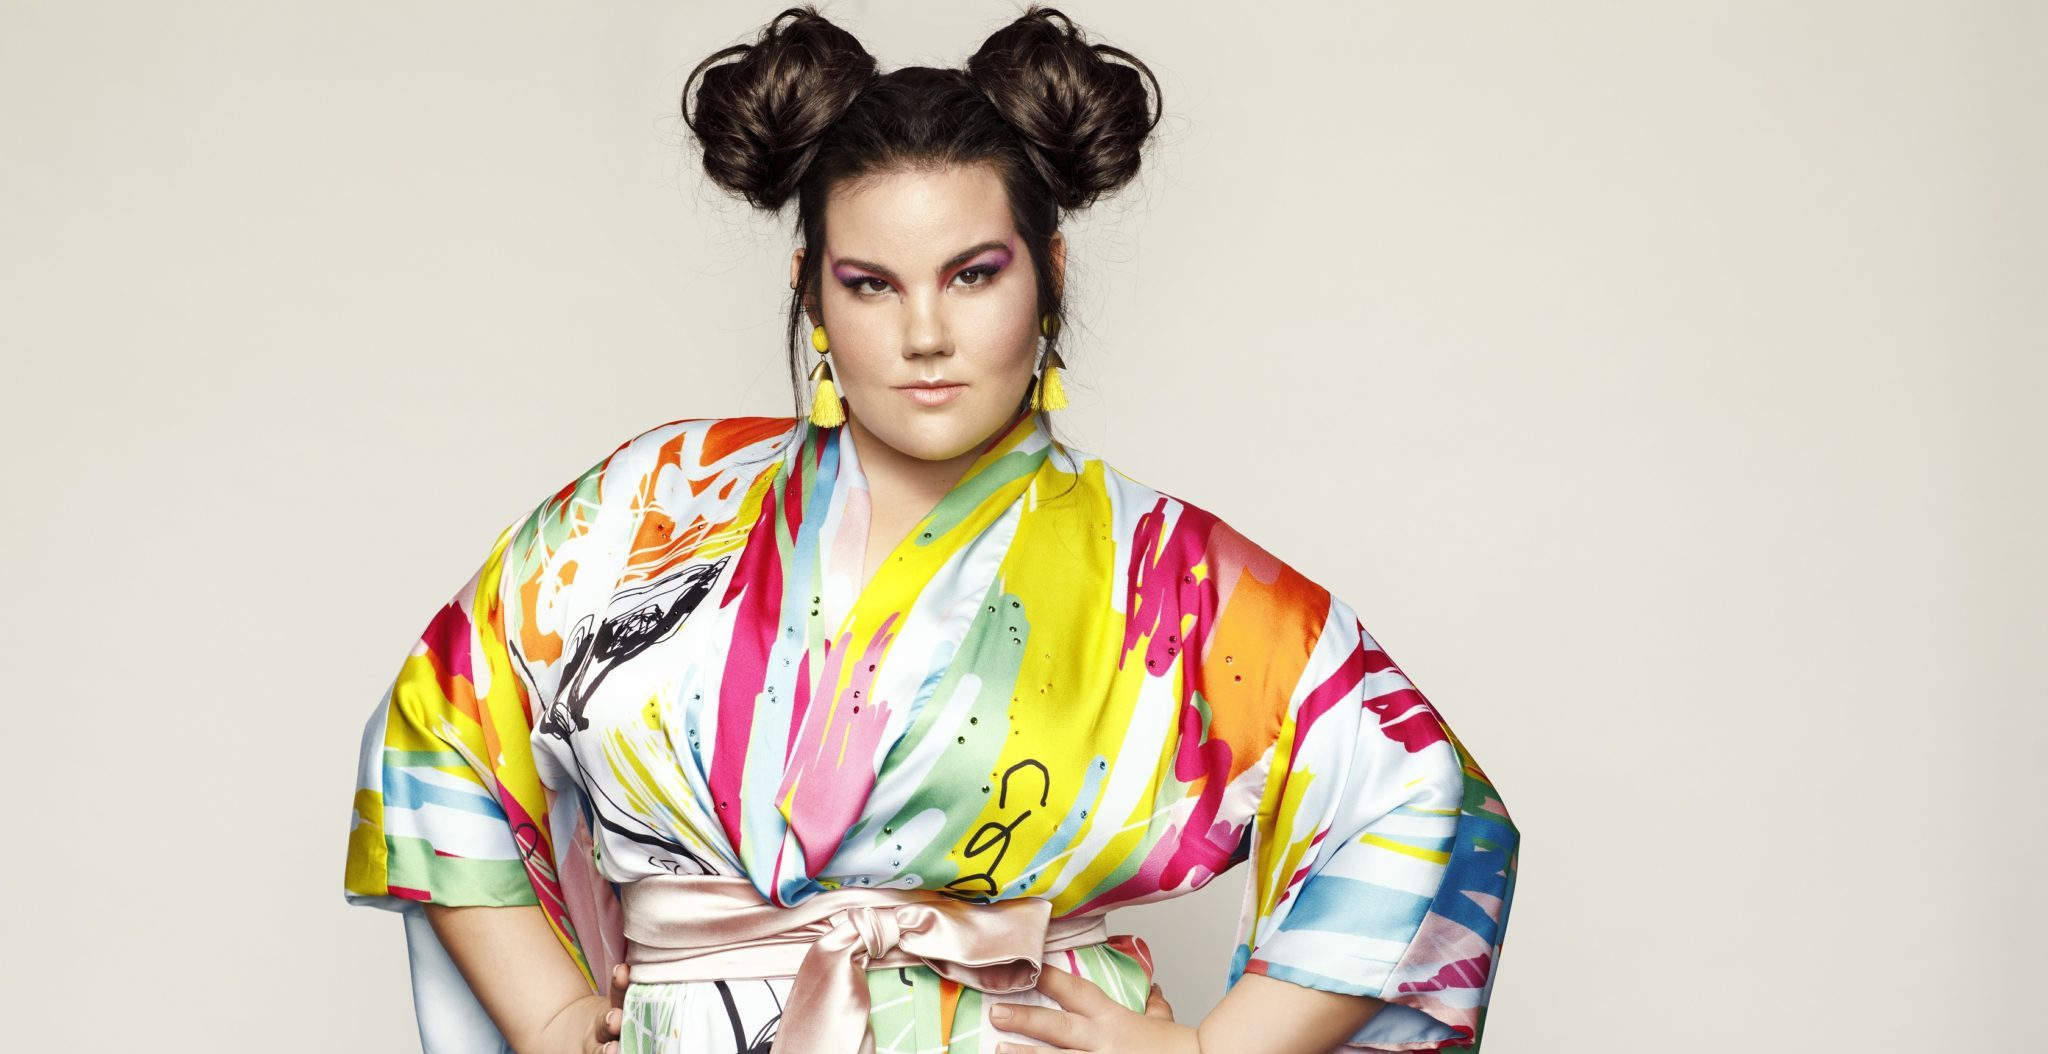 Netta to ESCplus: “It’s like opening the wardrobe and waking up in Narnia” – Hot favourite to win Eurovision 2018